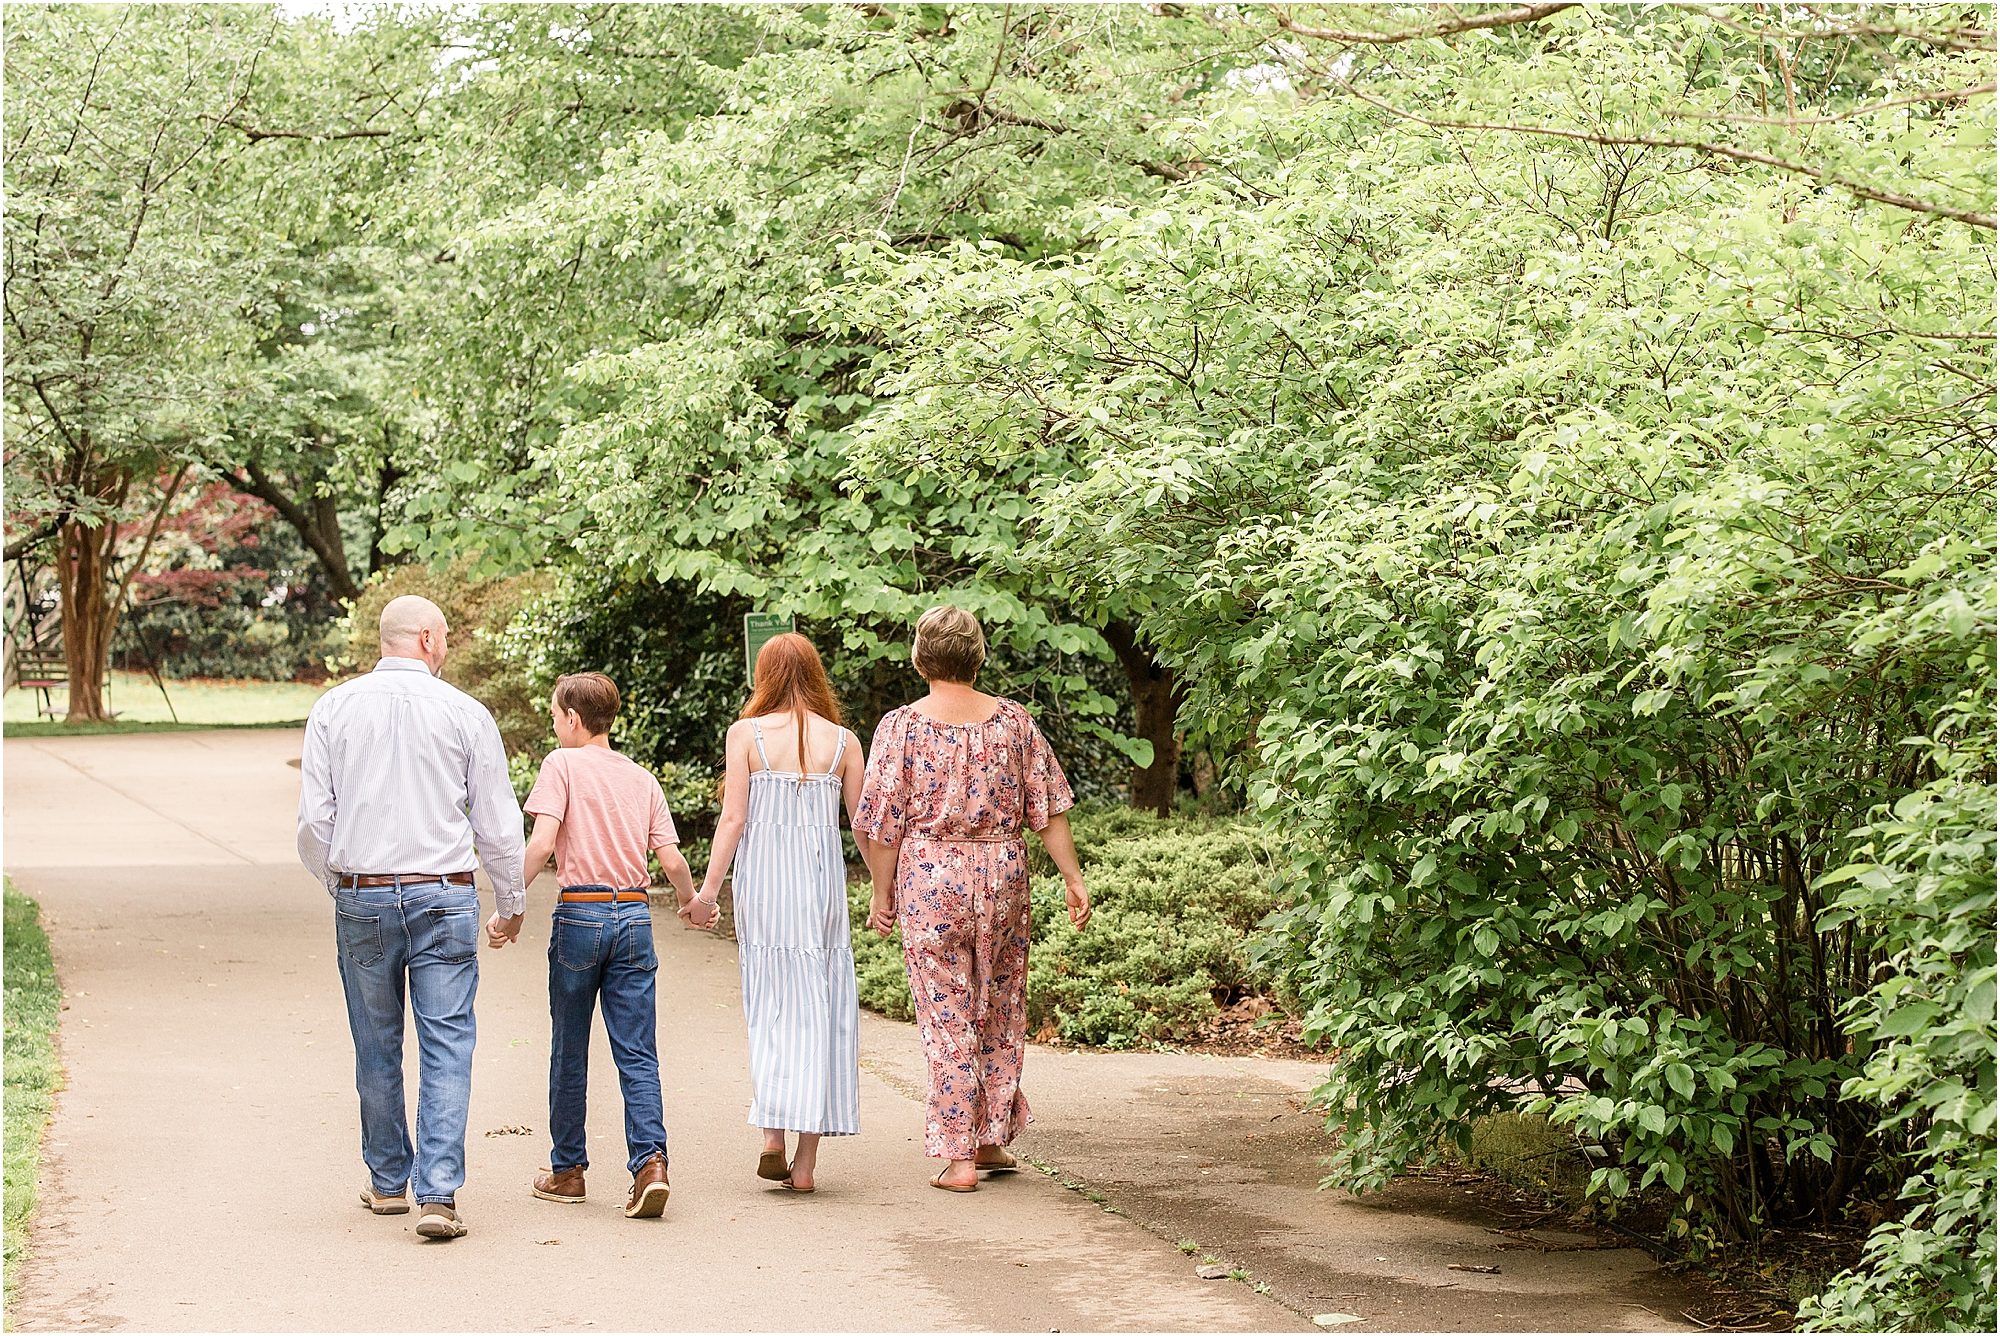 A family of 4 is walking down the sidewalk surrounded by beautiful greenery. Mom is wearing a pink floral jumpsuit. The daughter is wearing a sleeveless blue and white dress. Son is wearing a pink shirt and blue jeans. Dad is wearing a long sleeve button white shirt and blue jeans.